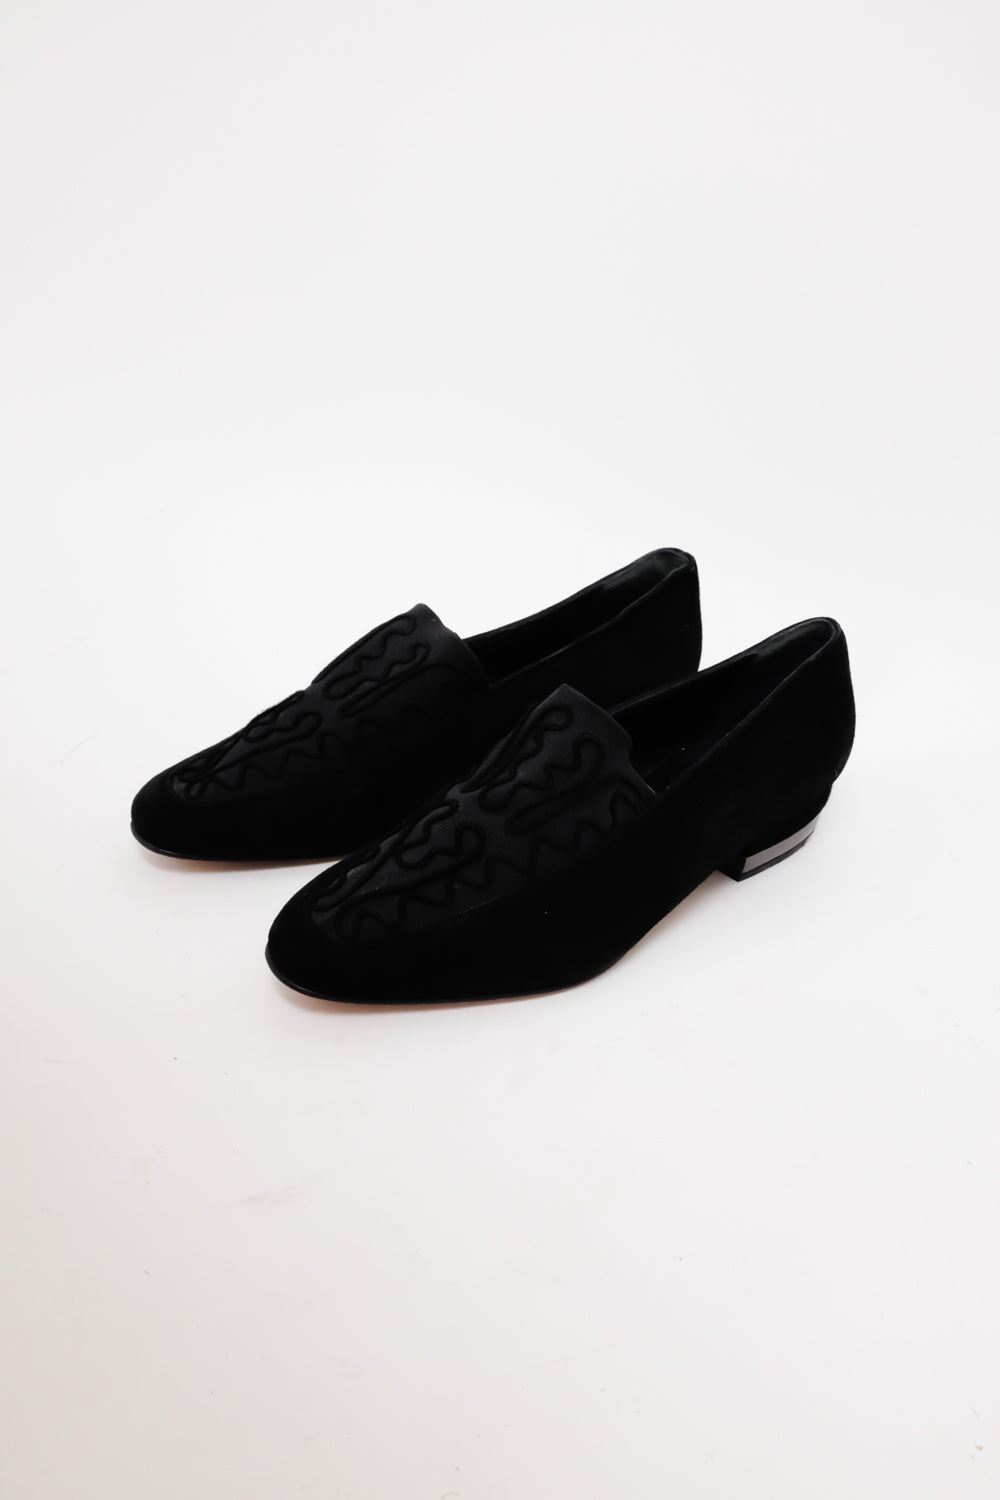 MARCO BURRESI ITALY BLACK LEATHER LOAFER